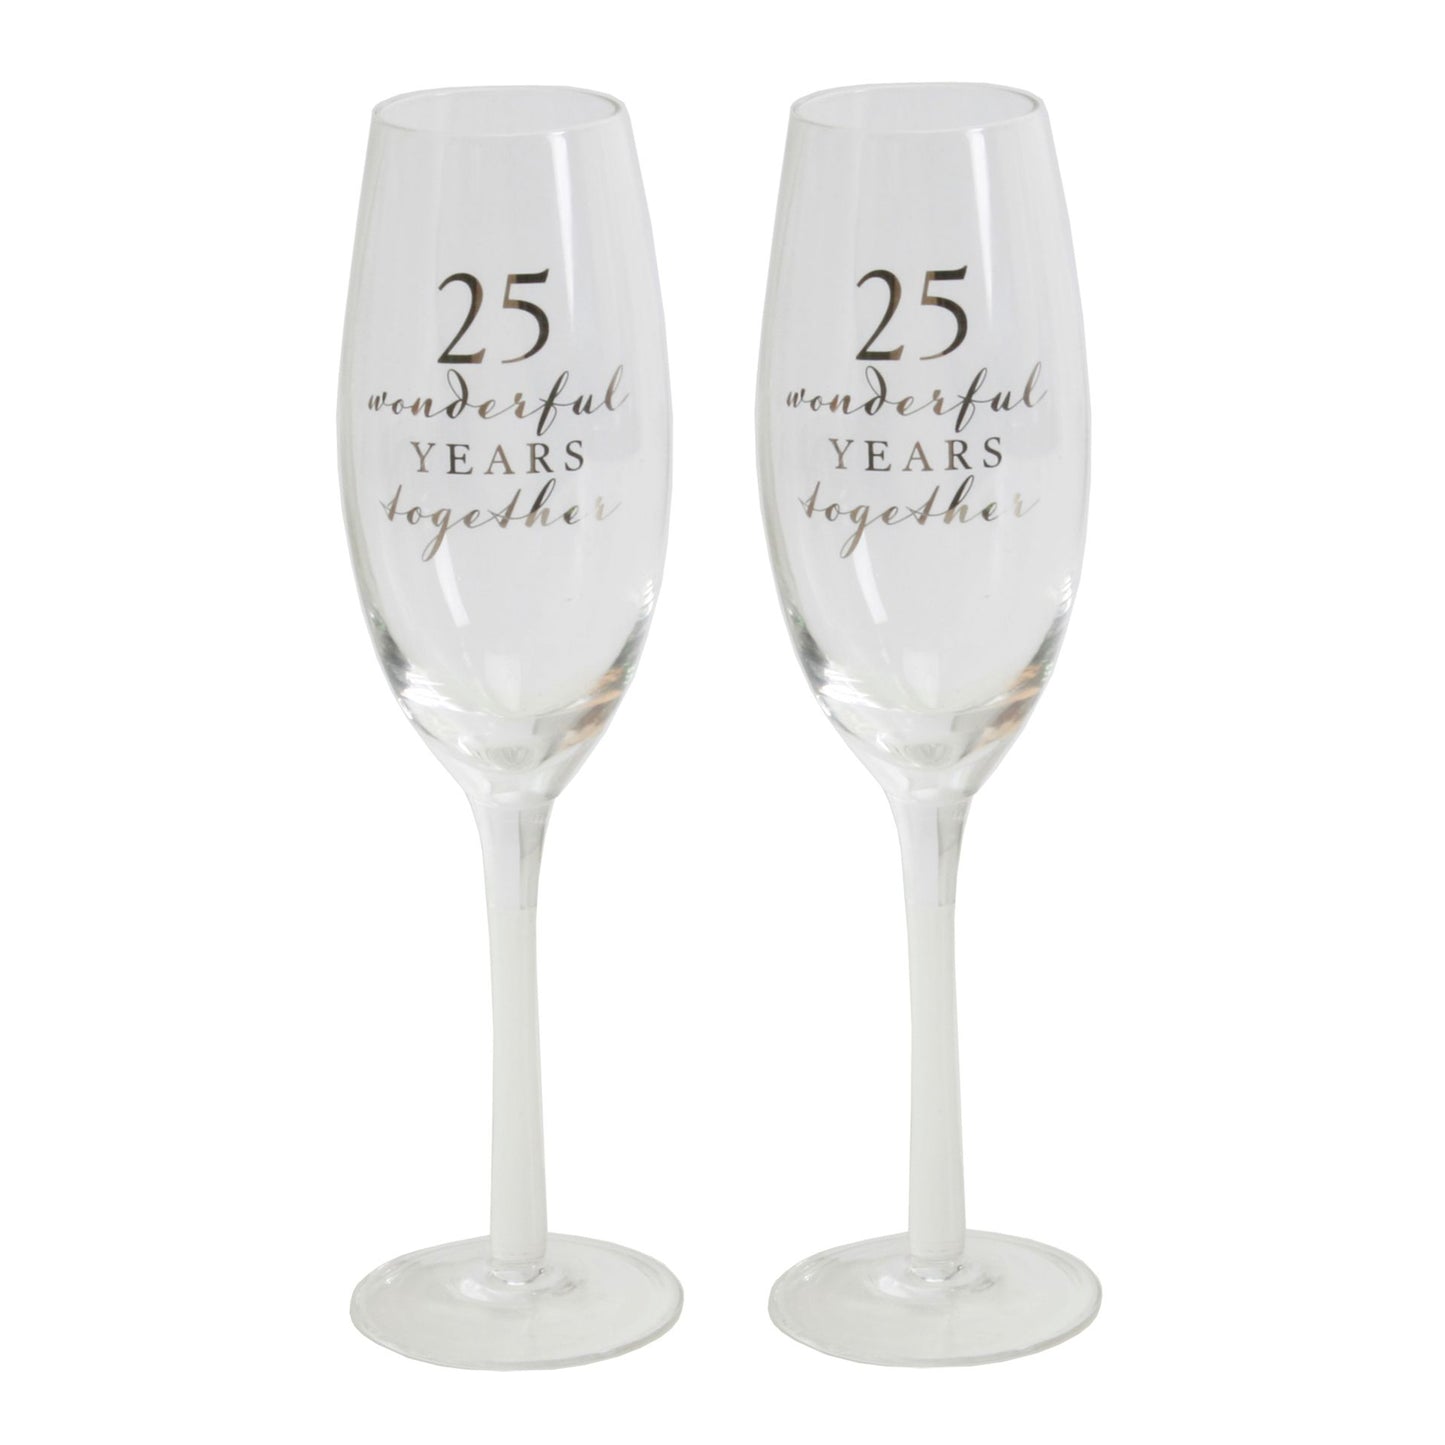 AMORE Champagne Flutes Set Of Two - 25TH Anniversary